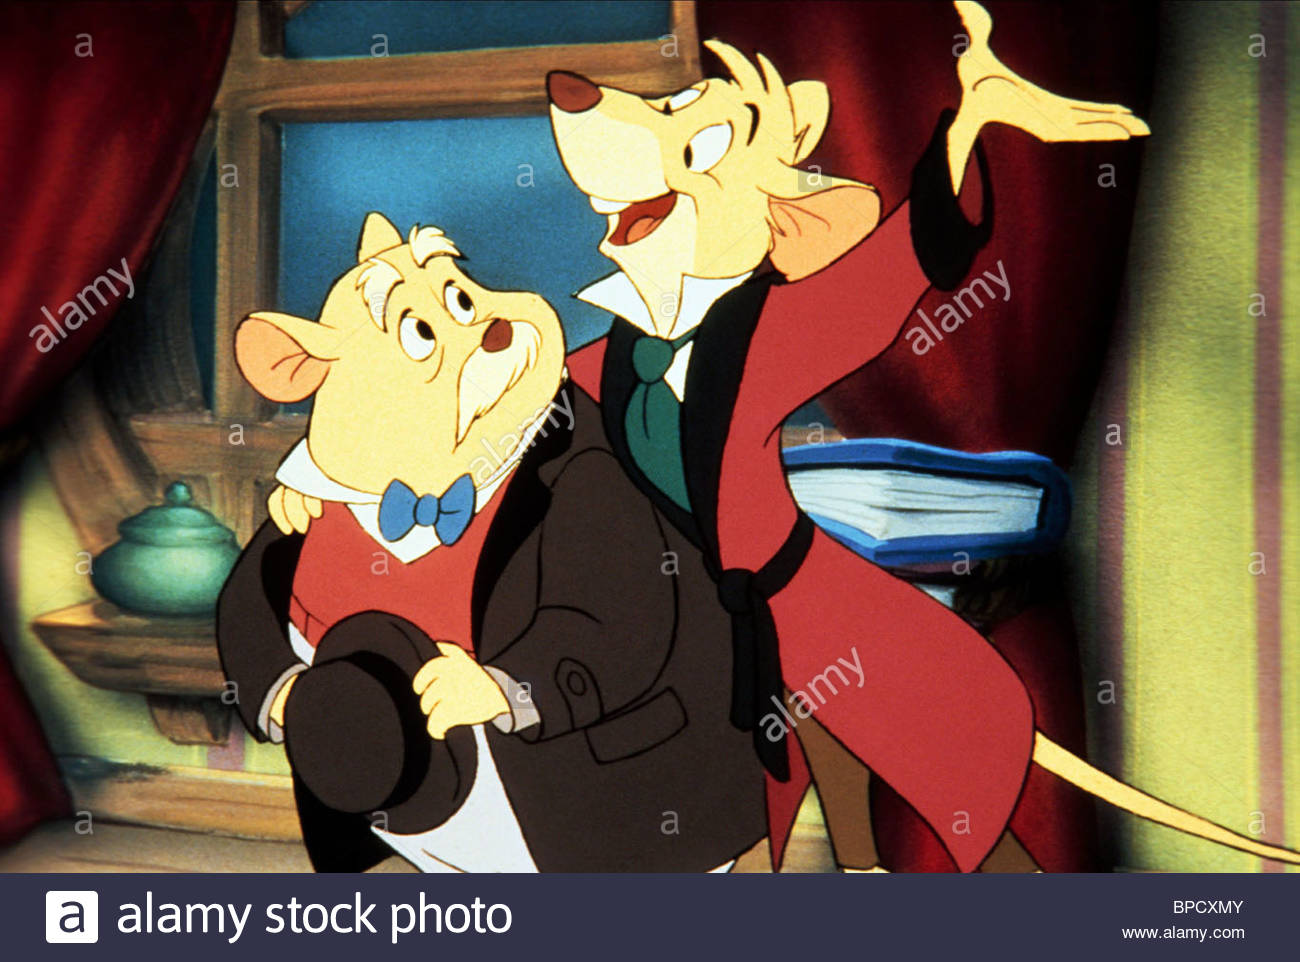 The Great Mouse Detective #4